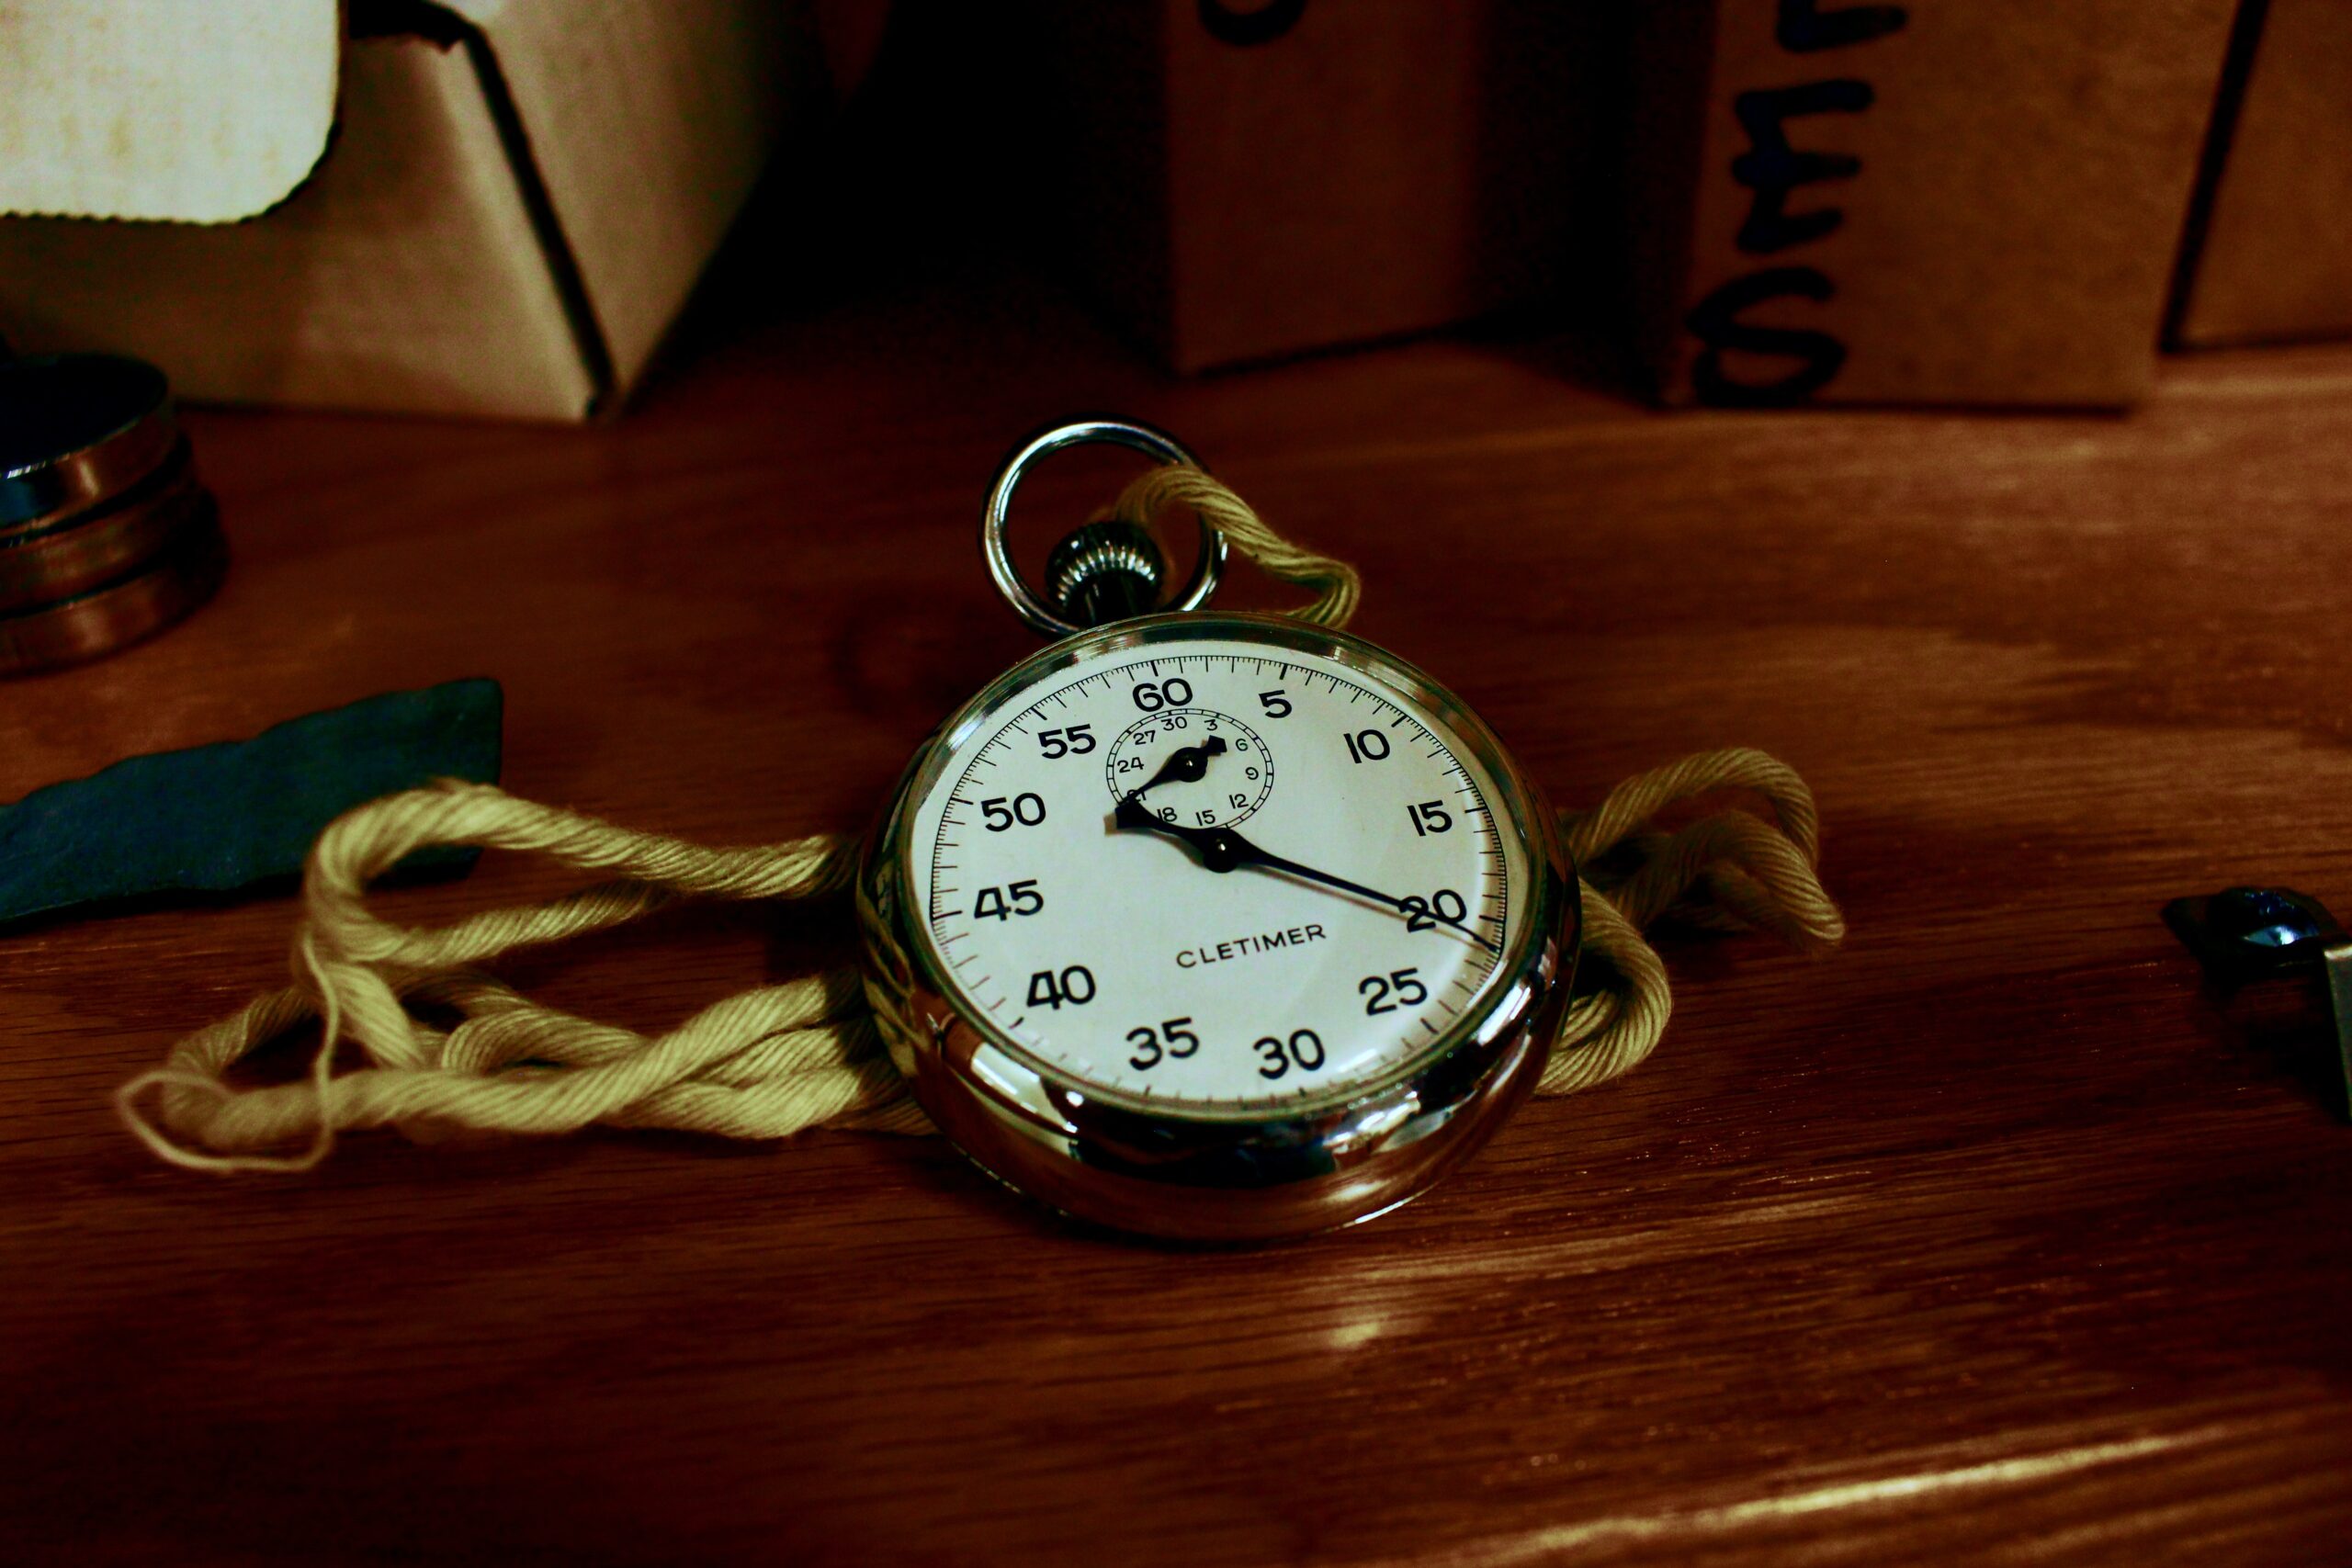 Photo by Shawn Stutzman: https://www.pexels.com/photo/white-pocket-watch-with-gold-colored-frame-on-brown-wooden-board-1010513/